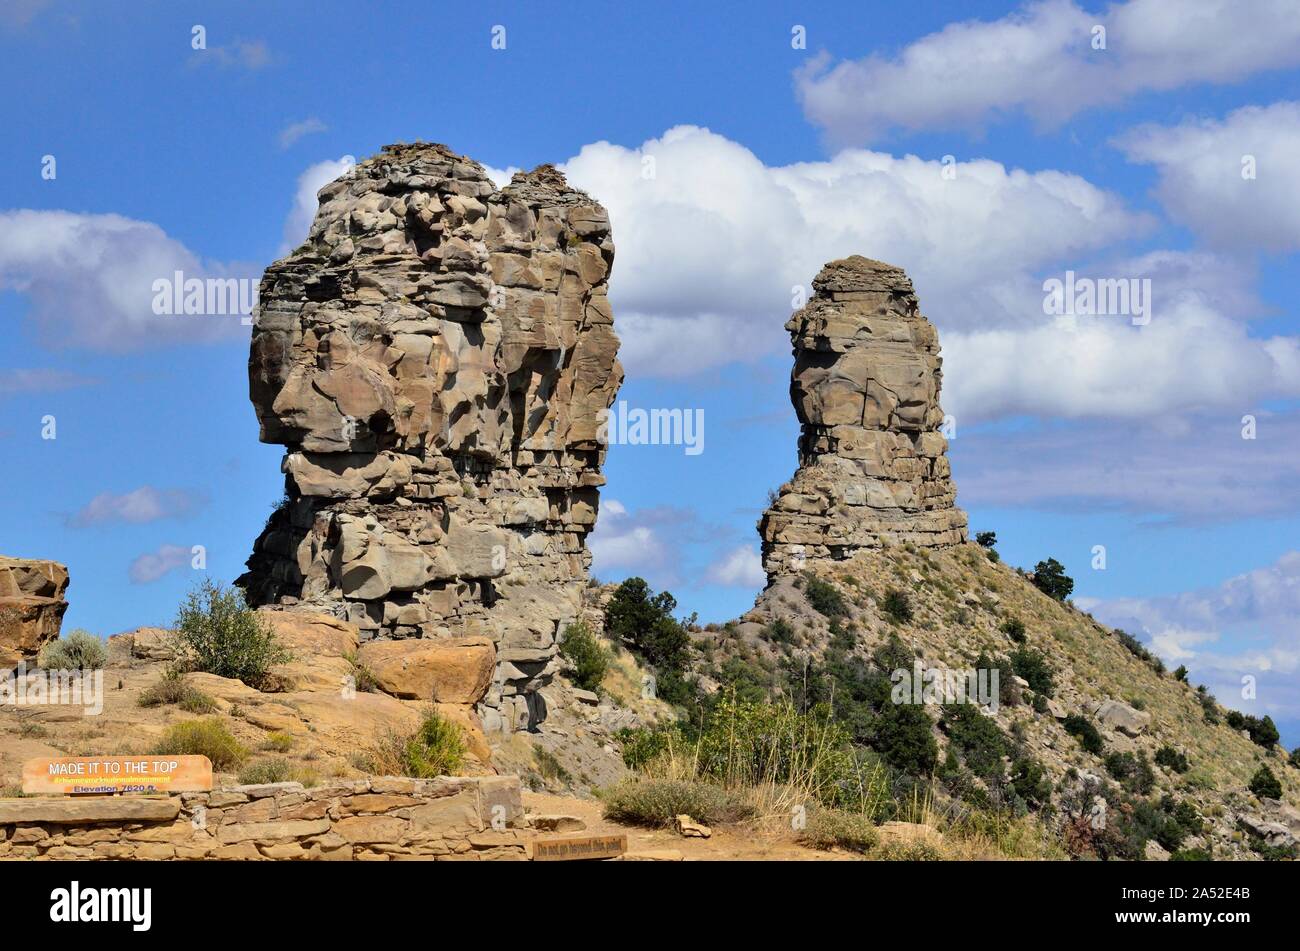 Chimney Rock and Companion Rock, Chimney Rock National Monument, CO 190911 75256 Stock Photo